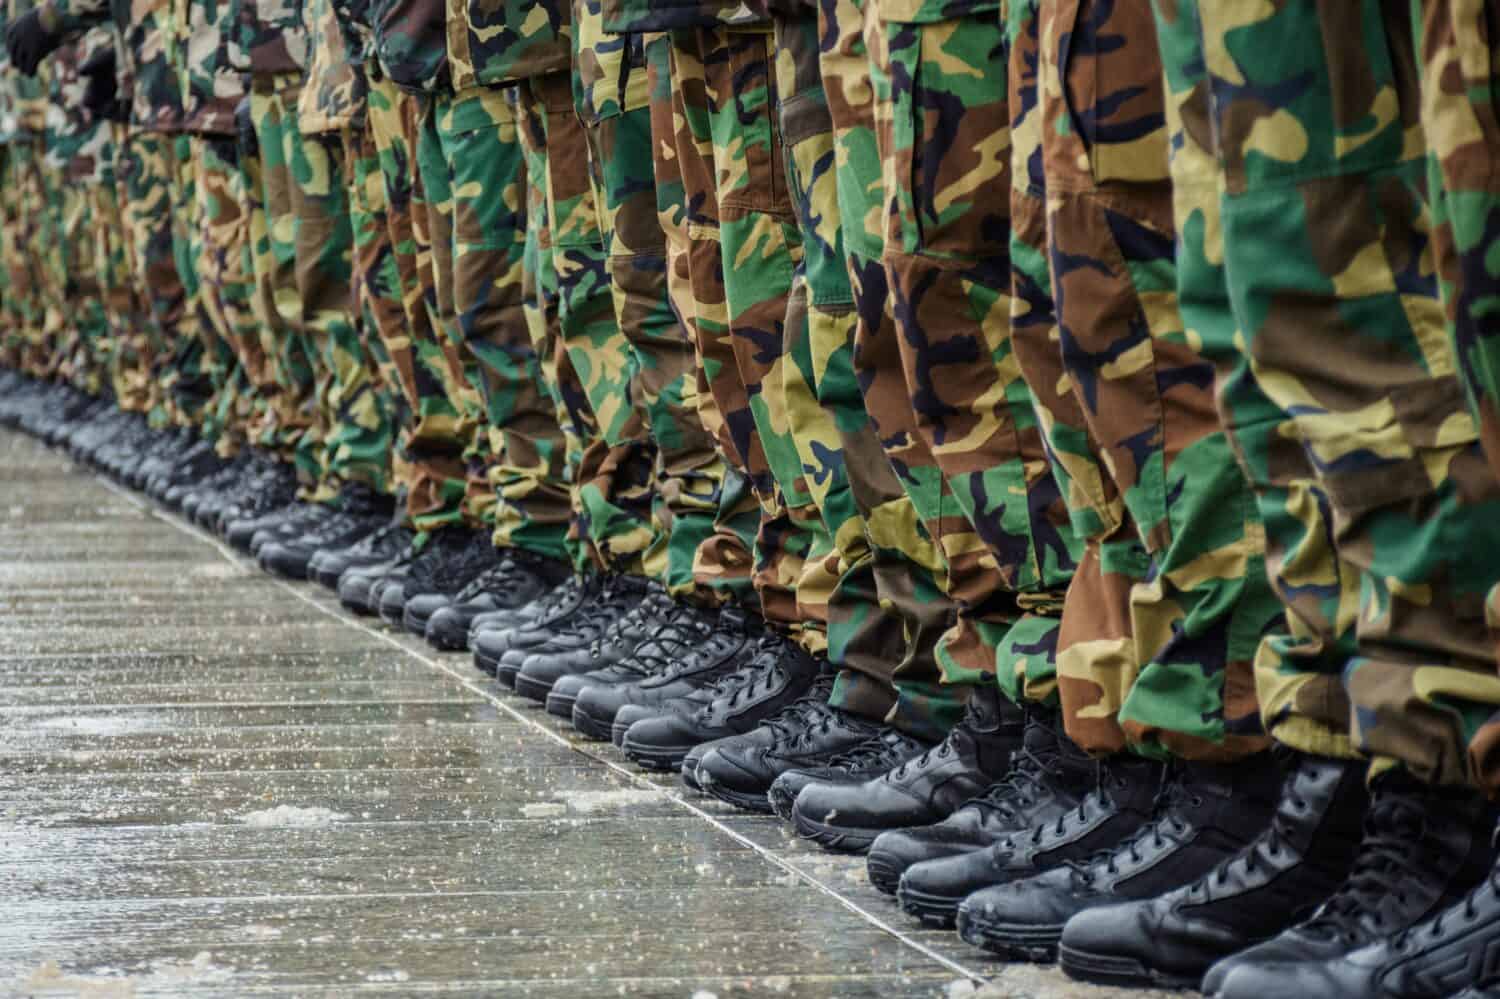 Military boots and camouflage trousers of many soldiers in uniform in a row under the rain and snow